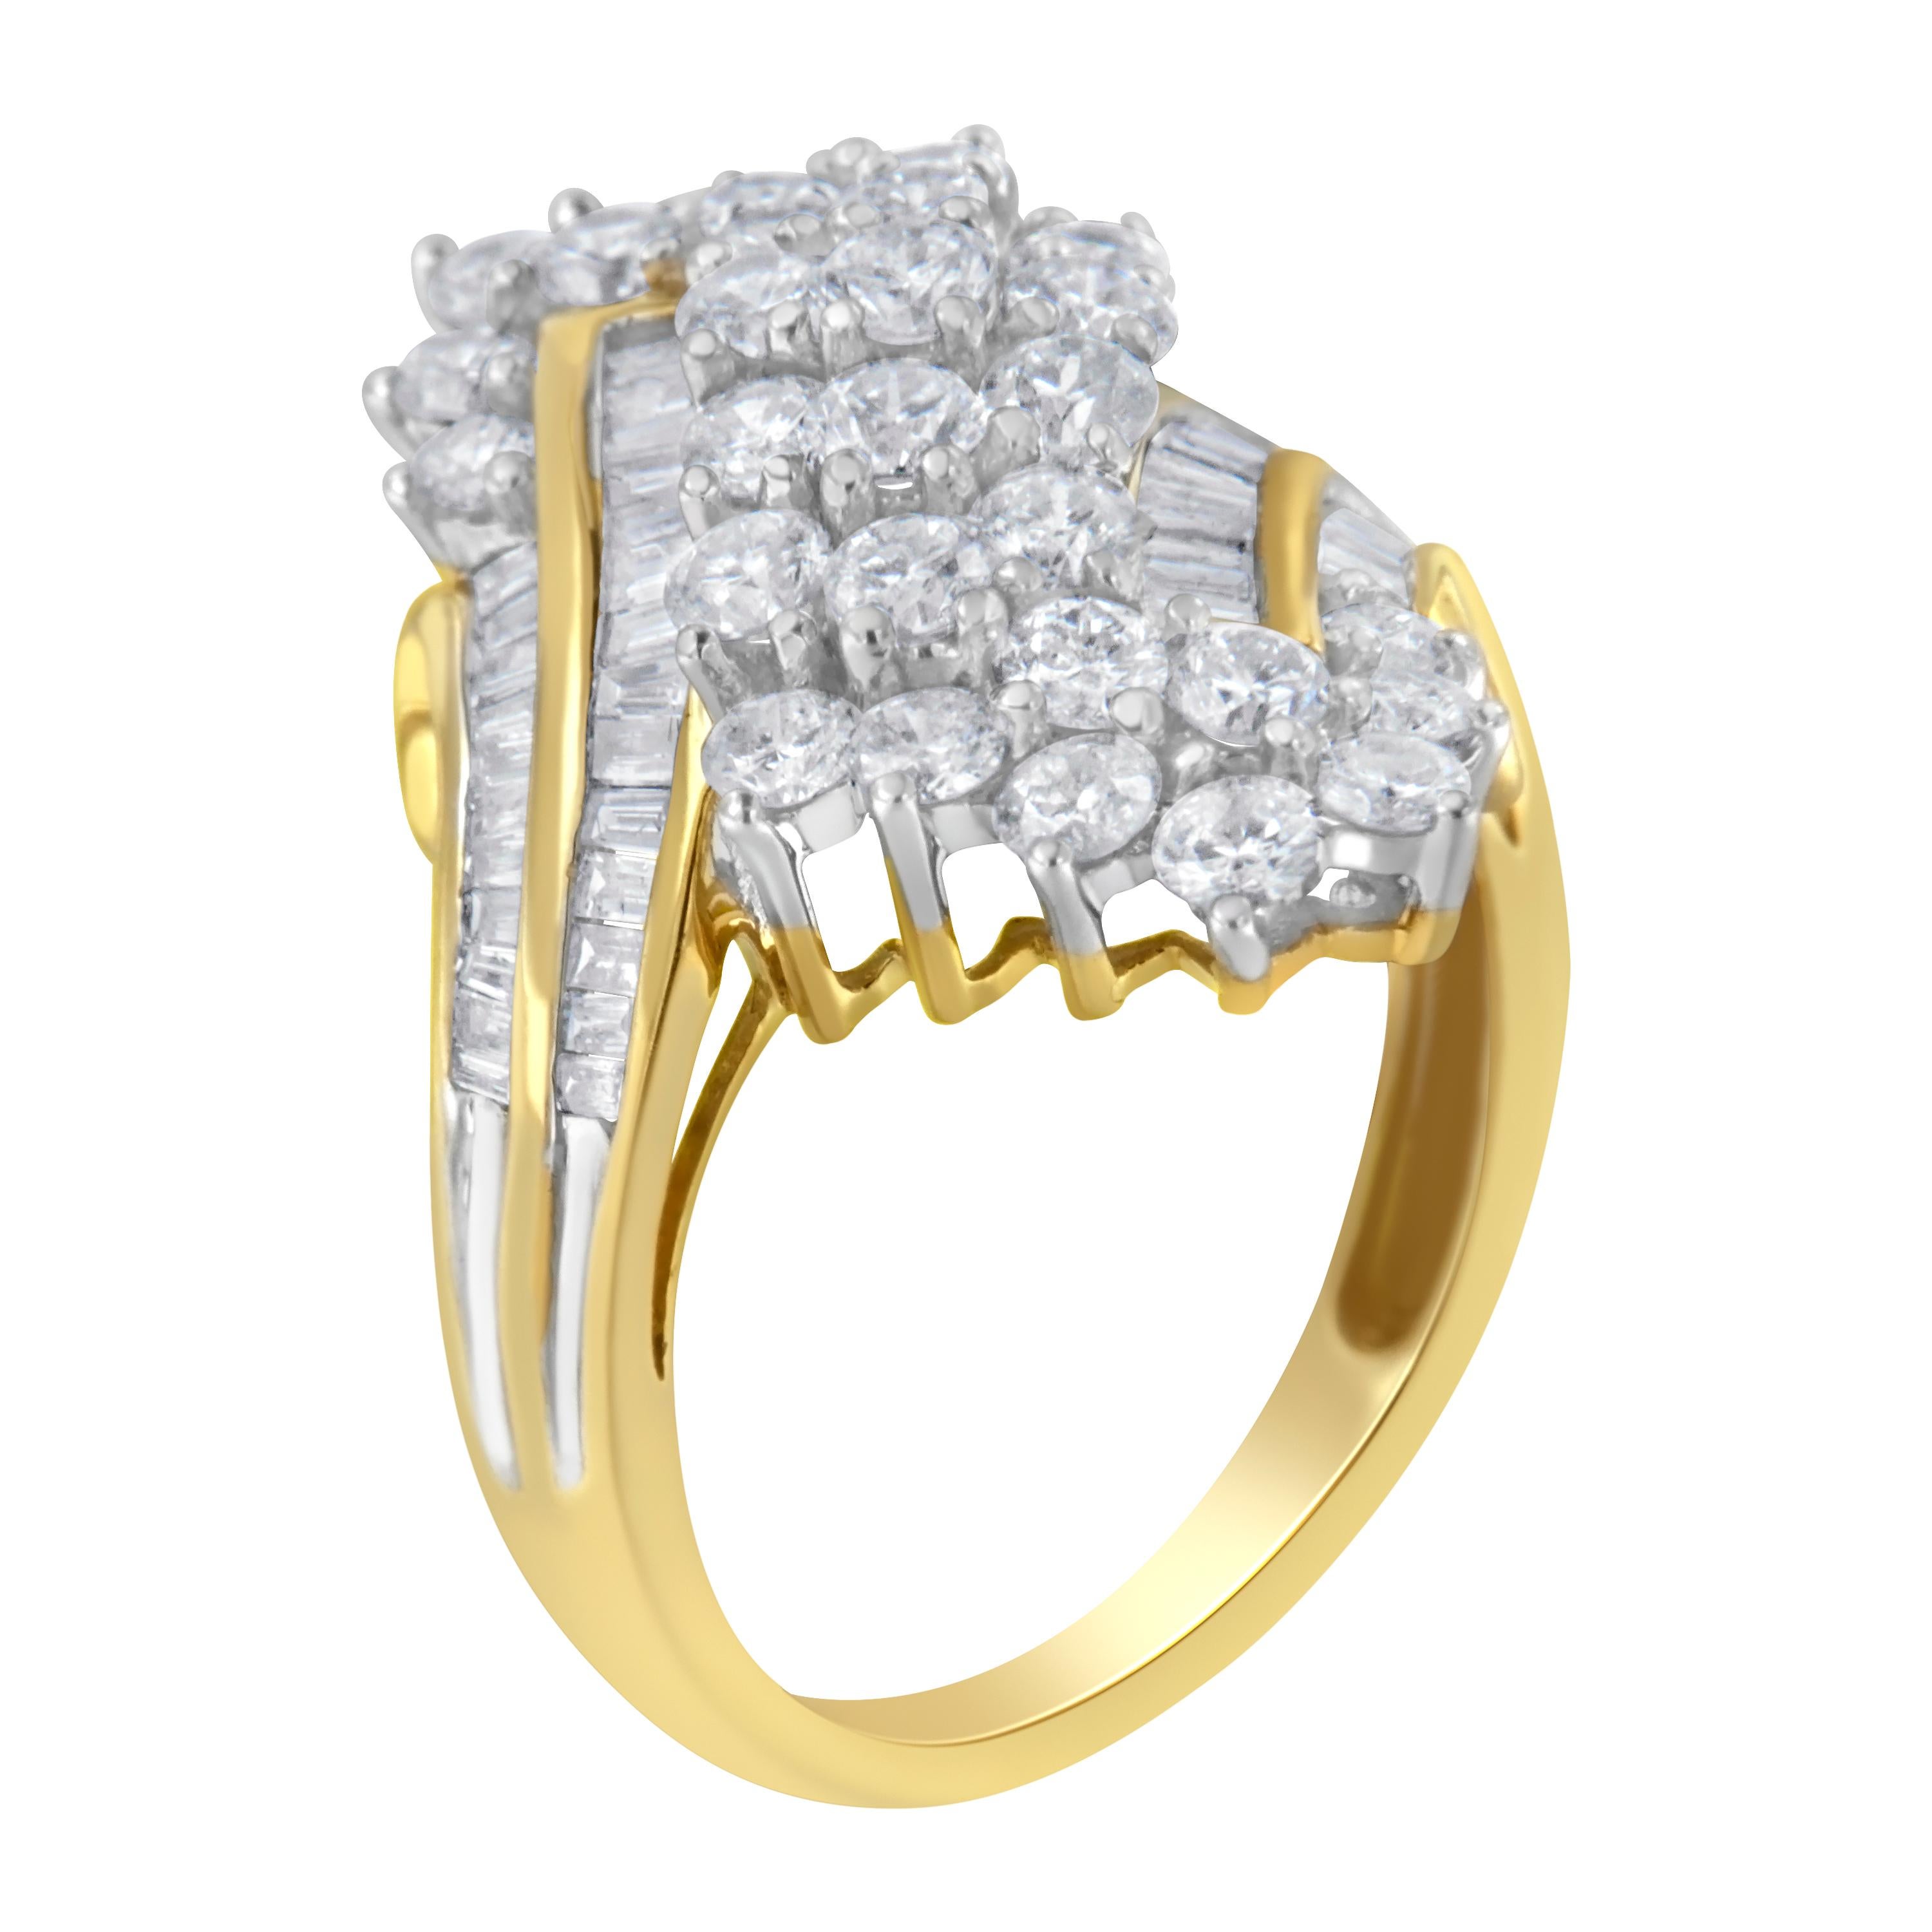 Contemporary 10K Yellow Gold 2 5/8 Carat Diamond Cluster Ring For Sale